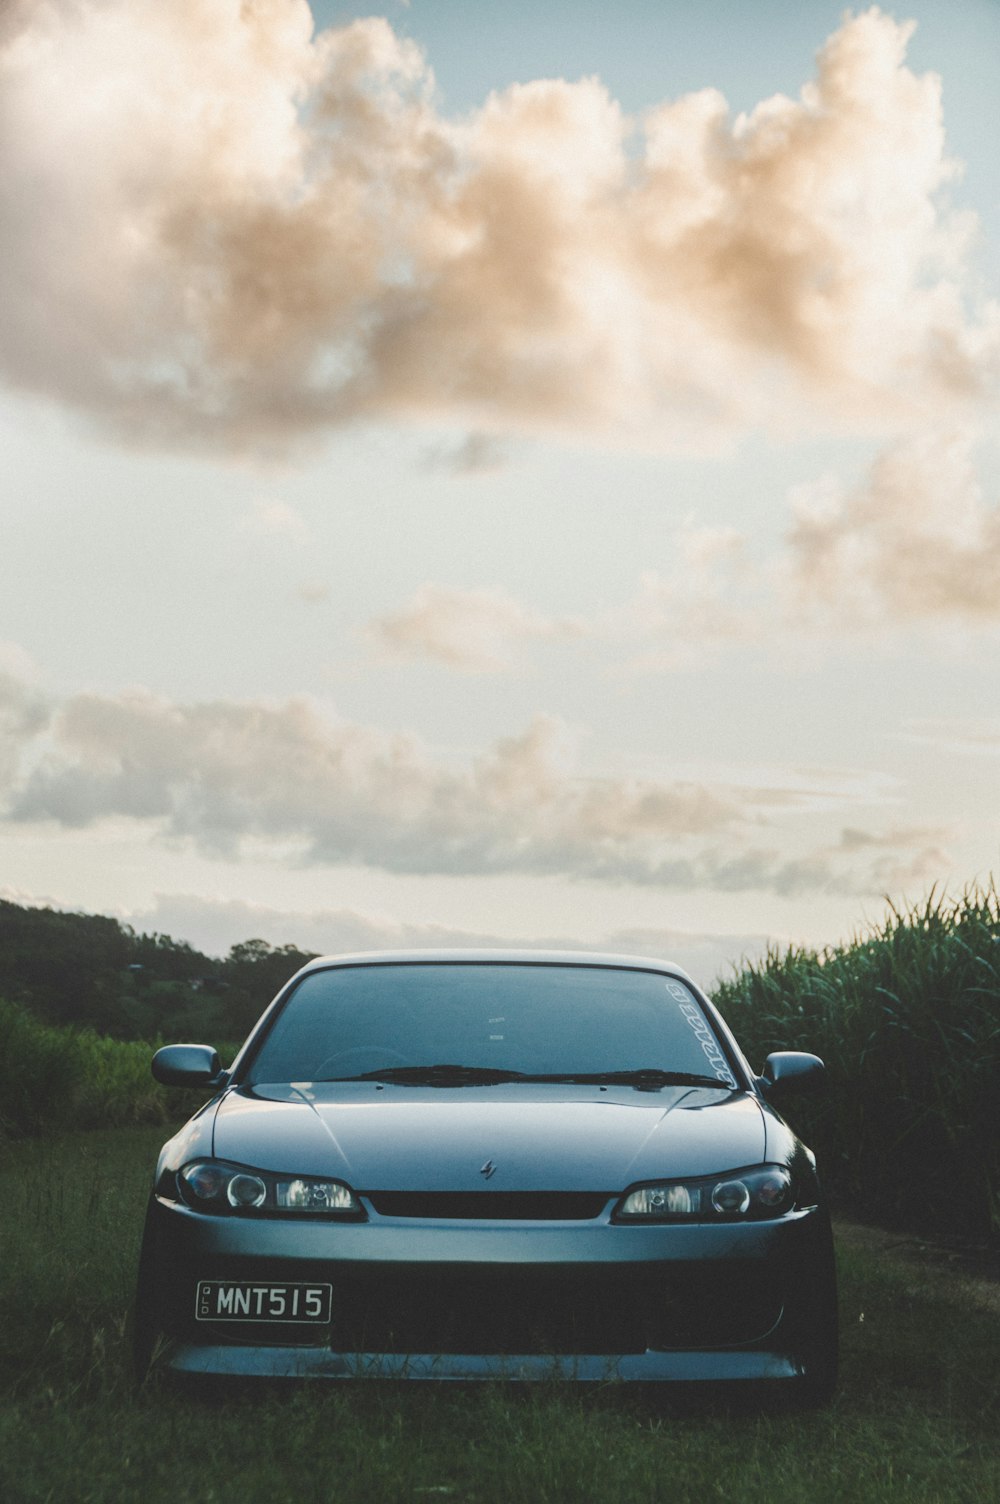 parked silver Nissan Silvia S15 during daytime